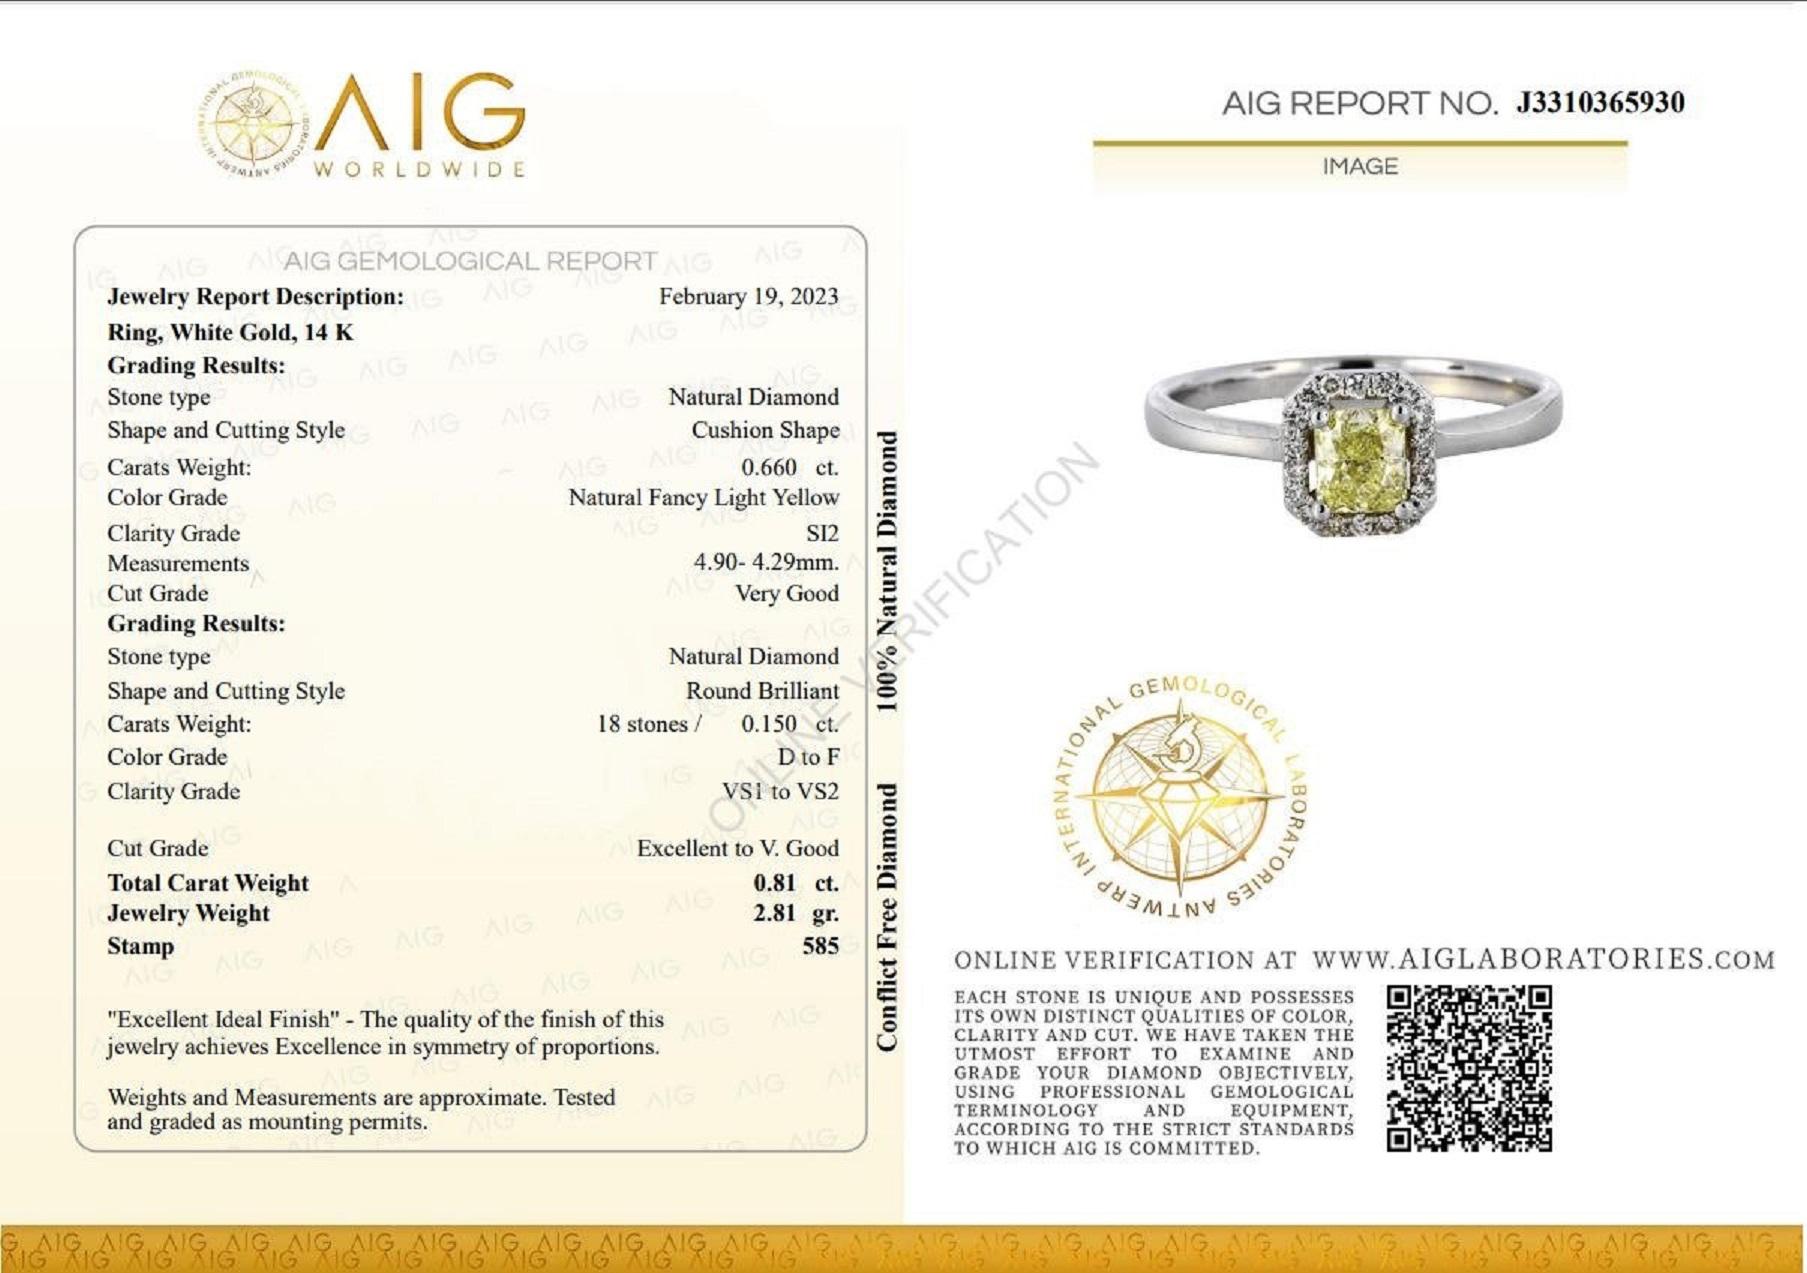 ** In Hong Kong and the USA the VAT is 0%.
Ring can be resized free of charge prior to shipping out.

Center Diamond:
Weight: 0.66 Carat
Color: Natural Fancy Light Yellow
Clarity: SI2
Shape: Cushion Shape

Side Stone Diamonds Round:
Weight: 0.15